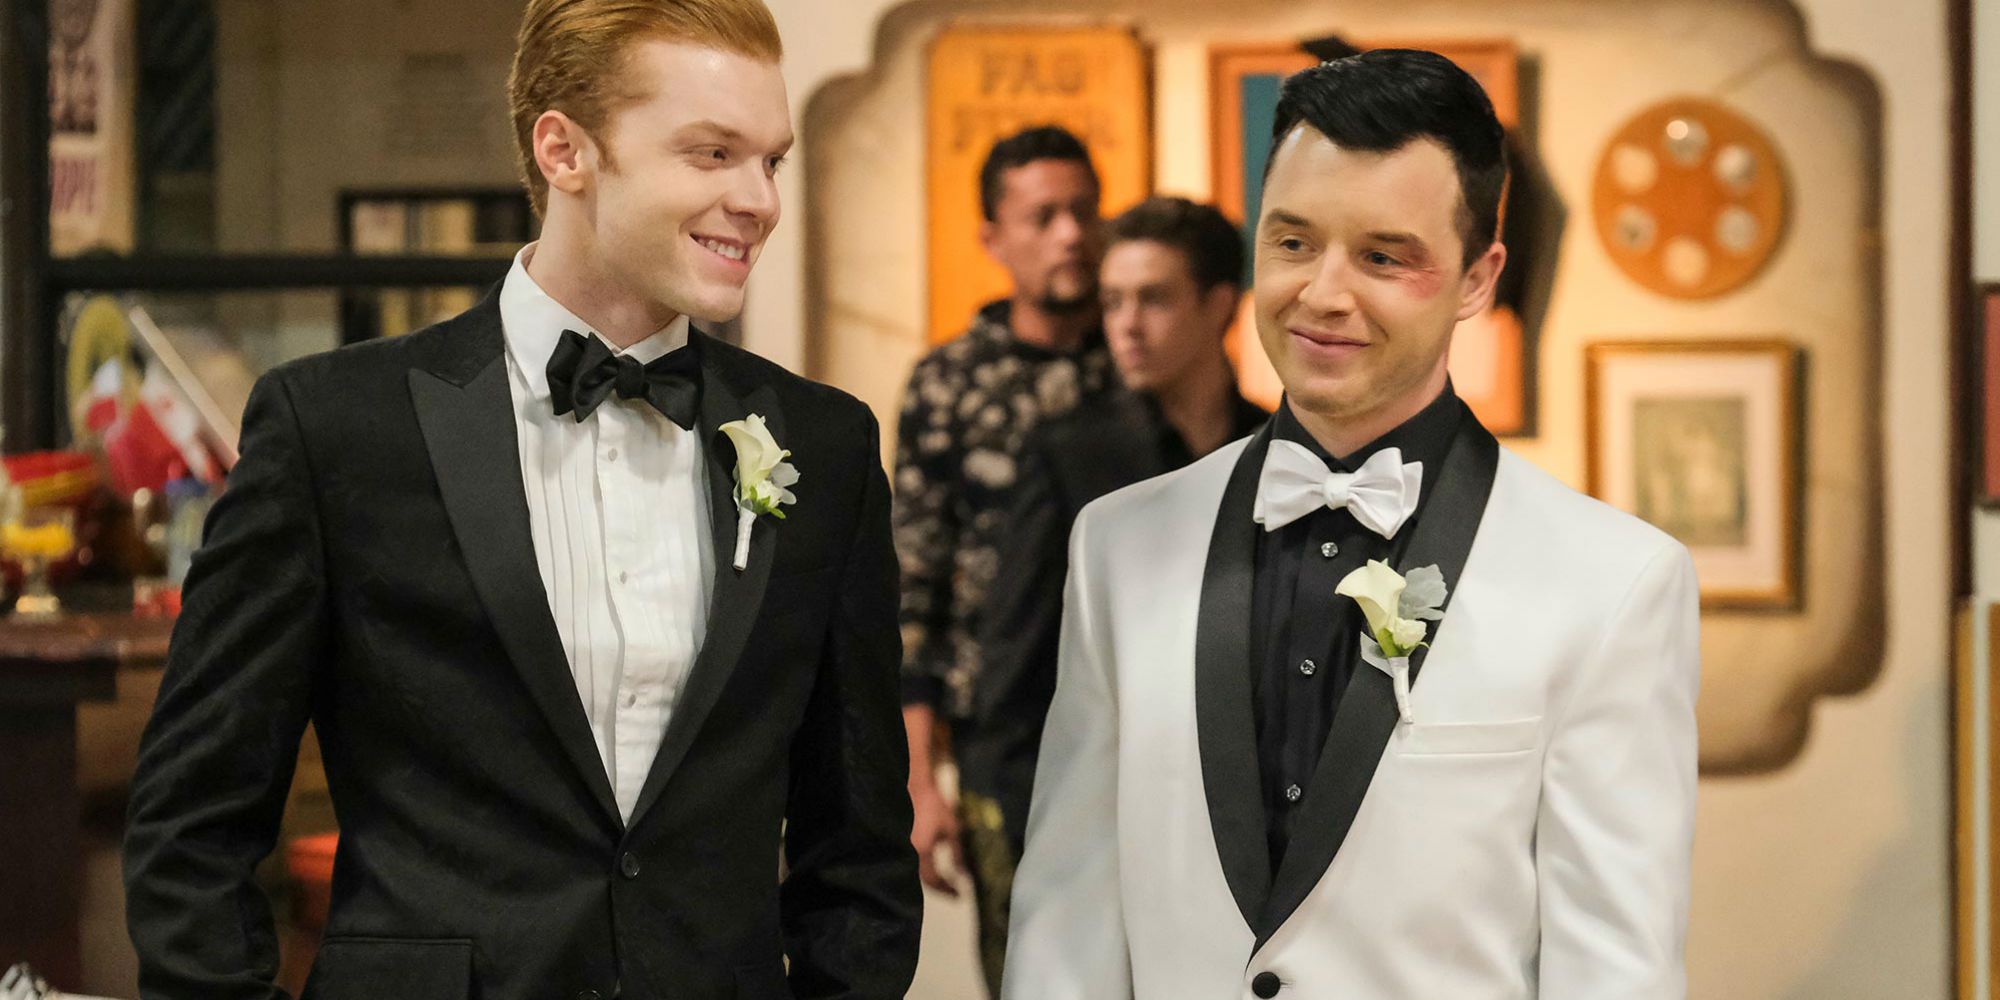 Ian and mickey at their wedding on shameless